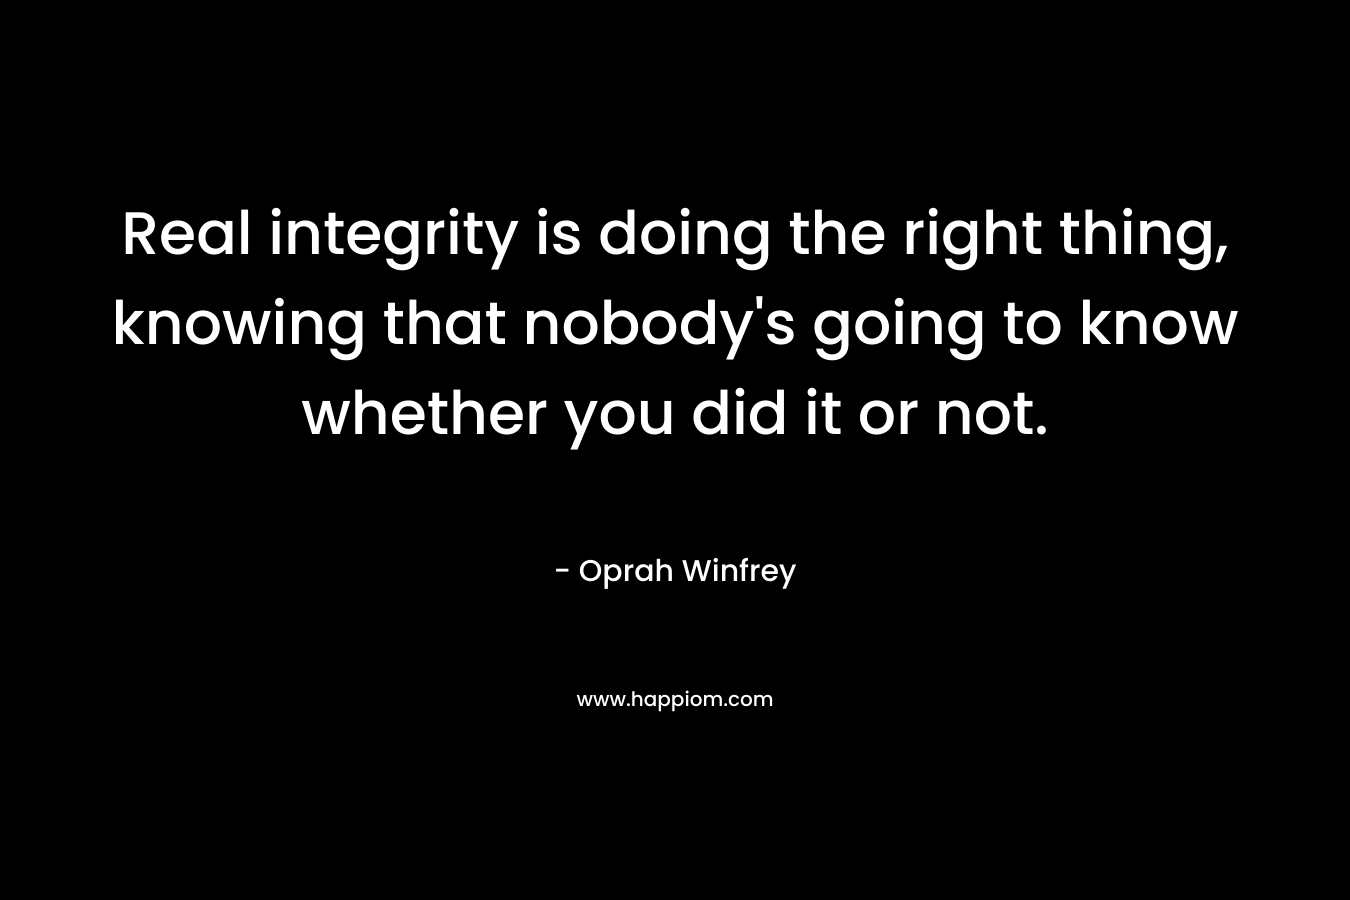 Real integrity is doing the right thing, knowing that nobody’s going to know whether you did it or not. – Oprah Winfrey